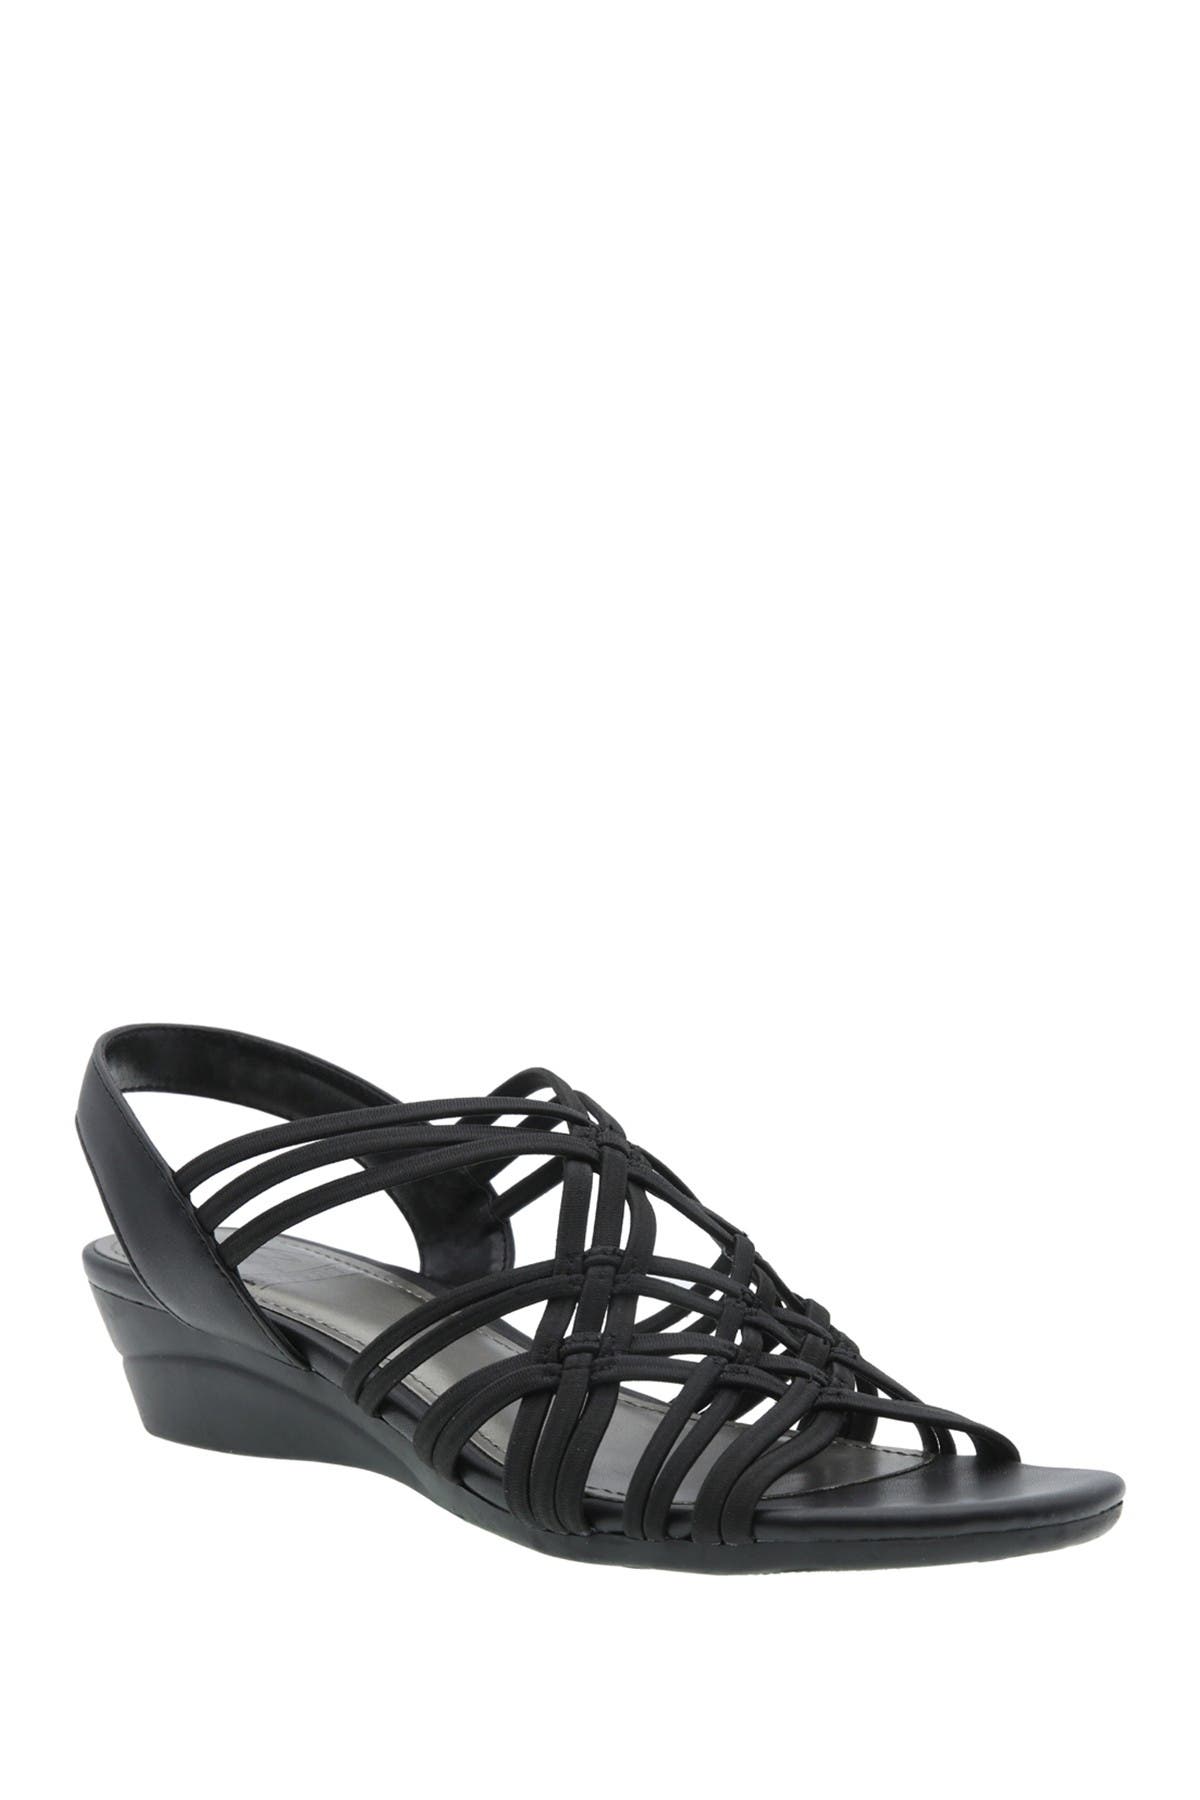 Impo Rainelle Stretch Wedge Sandal In Black Wide